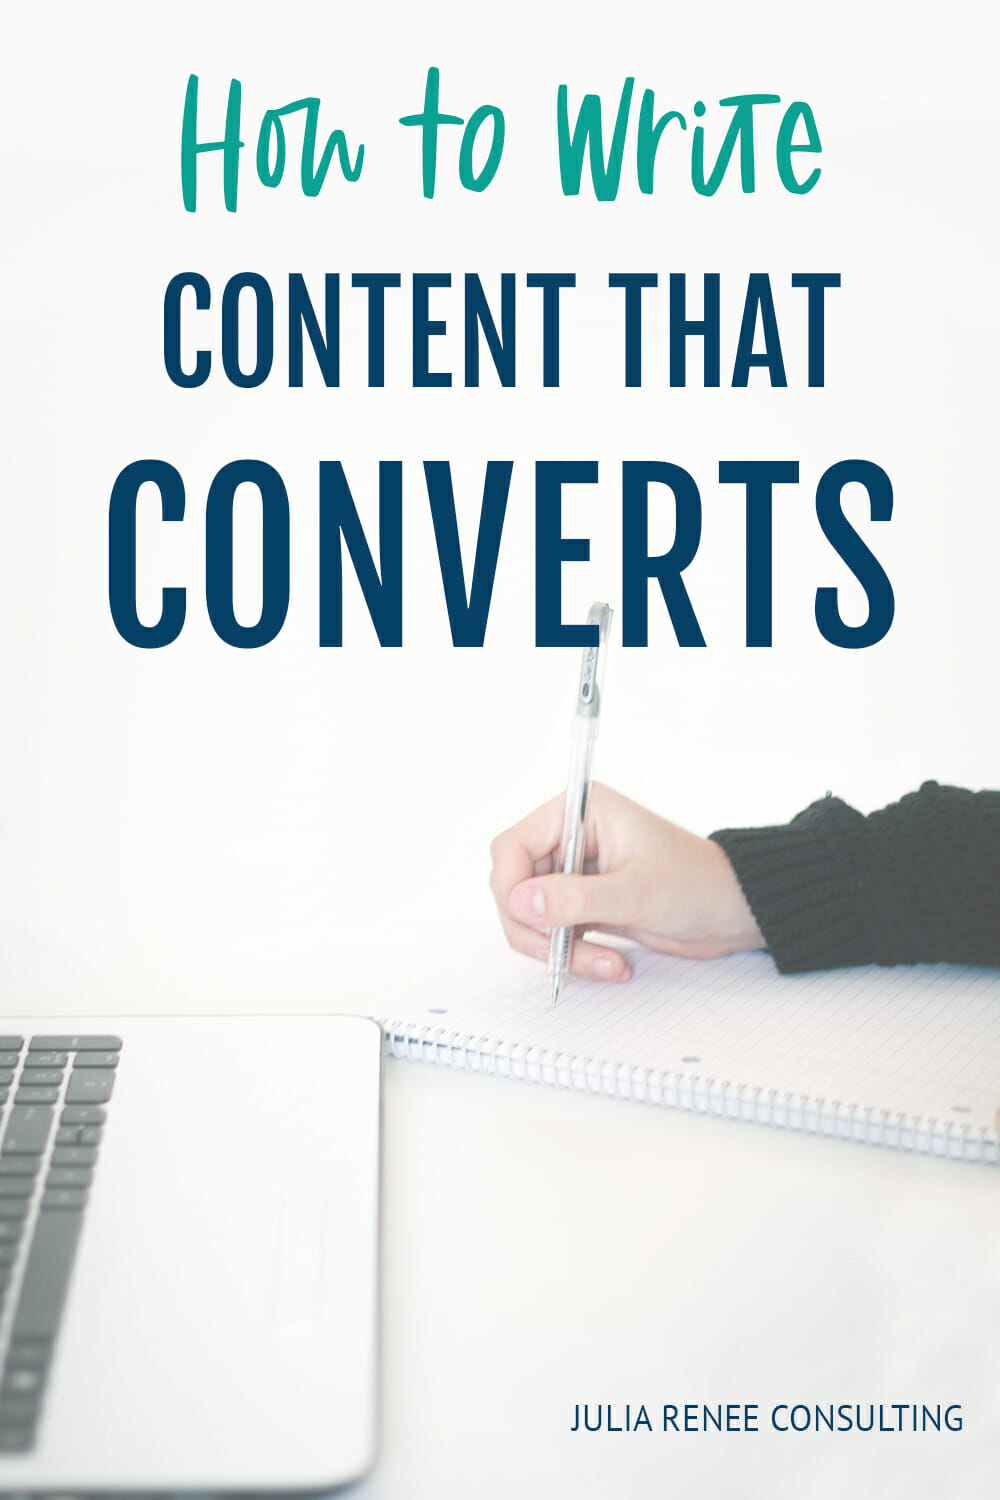 How Small Businesses Can Rank & Reach Clients with Content That Converts